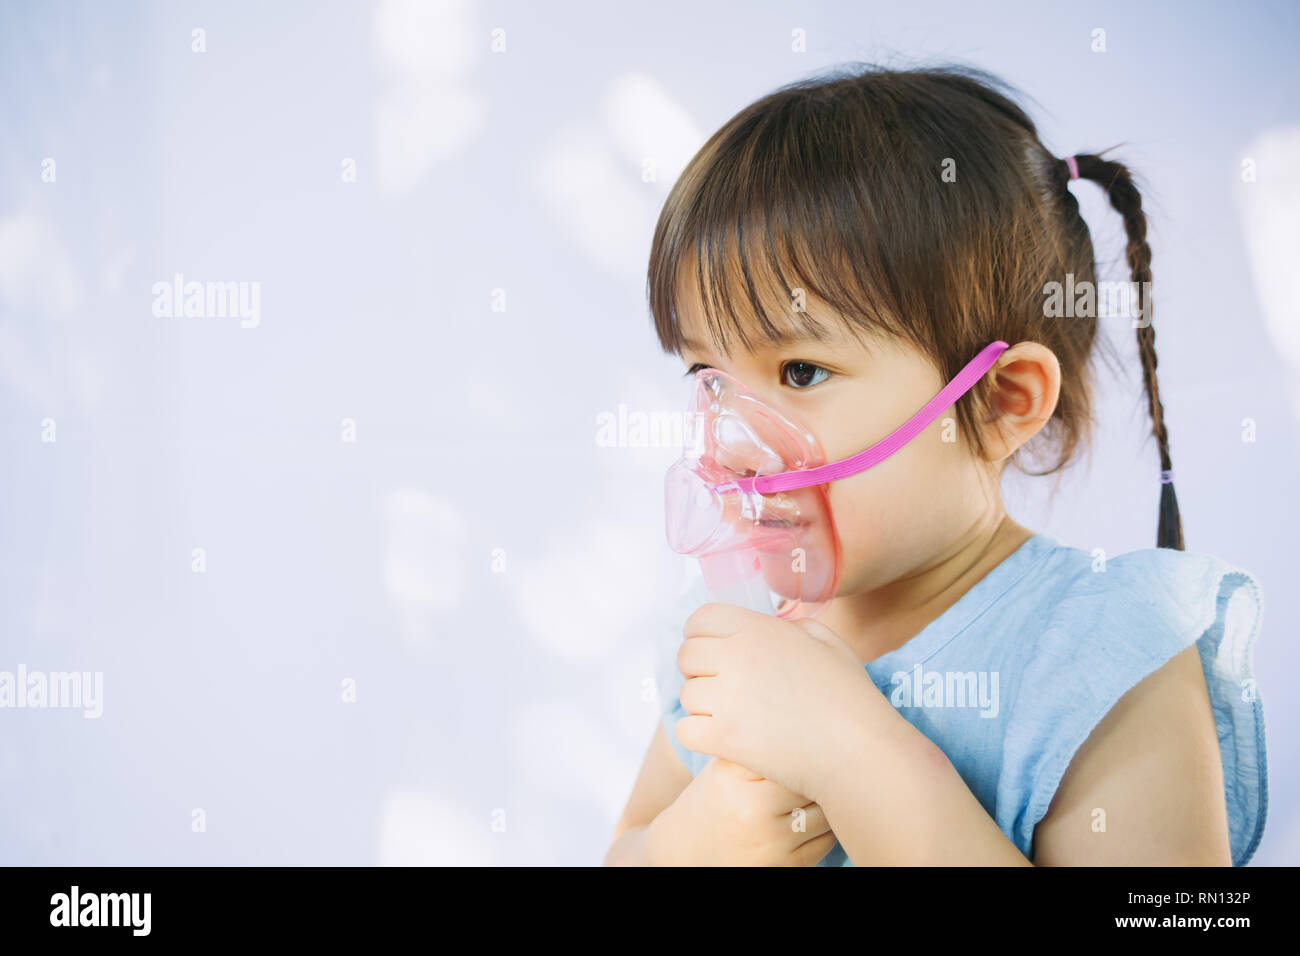 child who got sick by a chest infection after a cold or the flu that has trouble breathing and prolonged cough.A symptom of asthma or pneumonia. Stock Photo